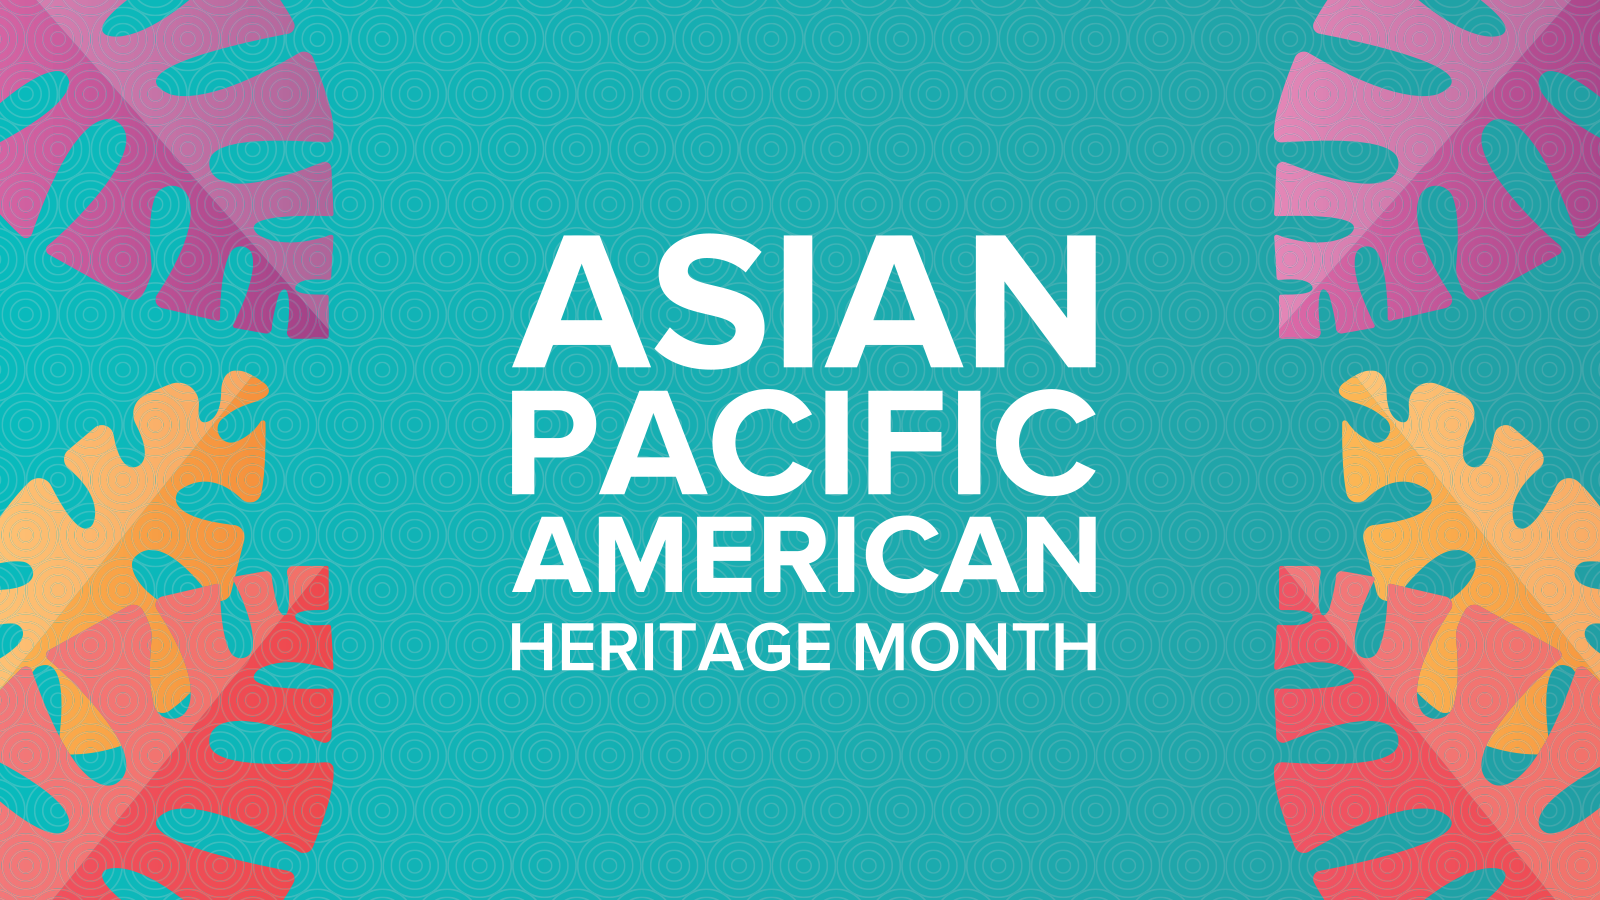 10+ Asian Pacific Americans to Celebrate this Heritage Month